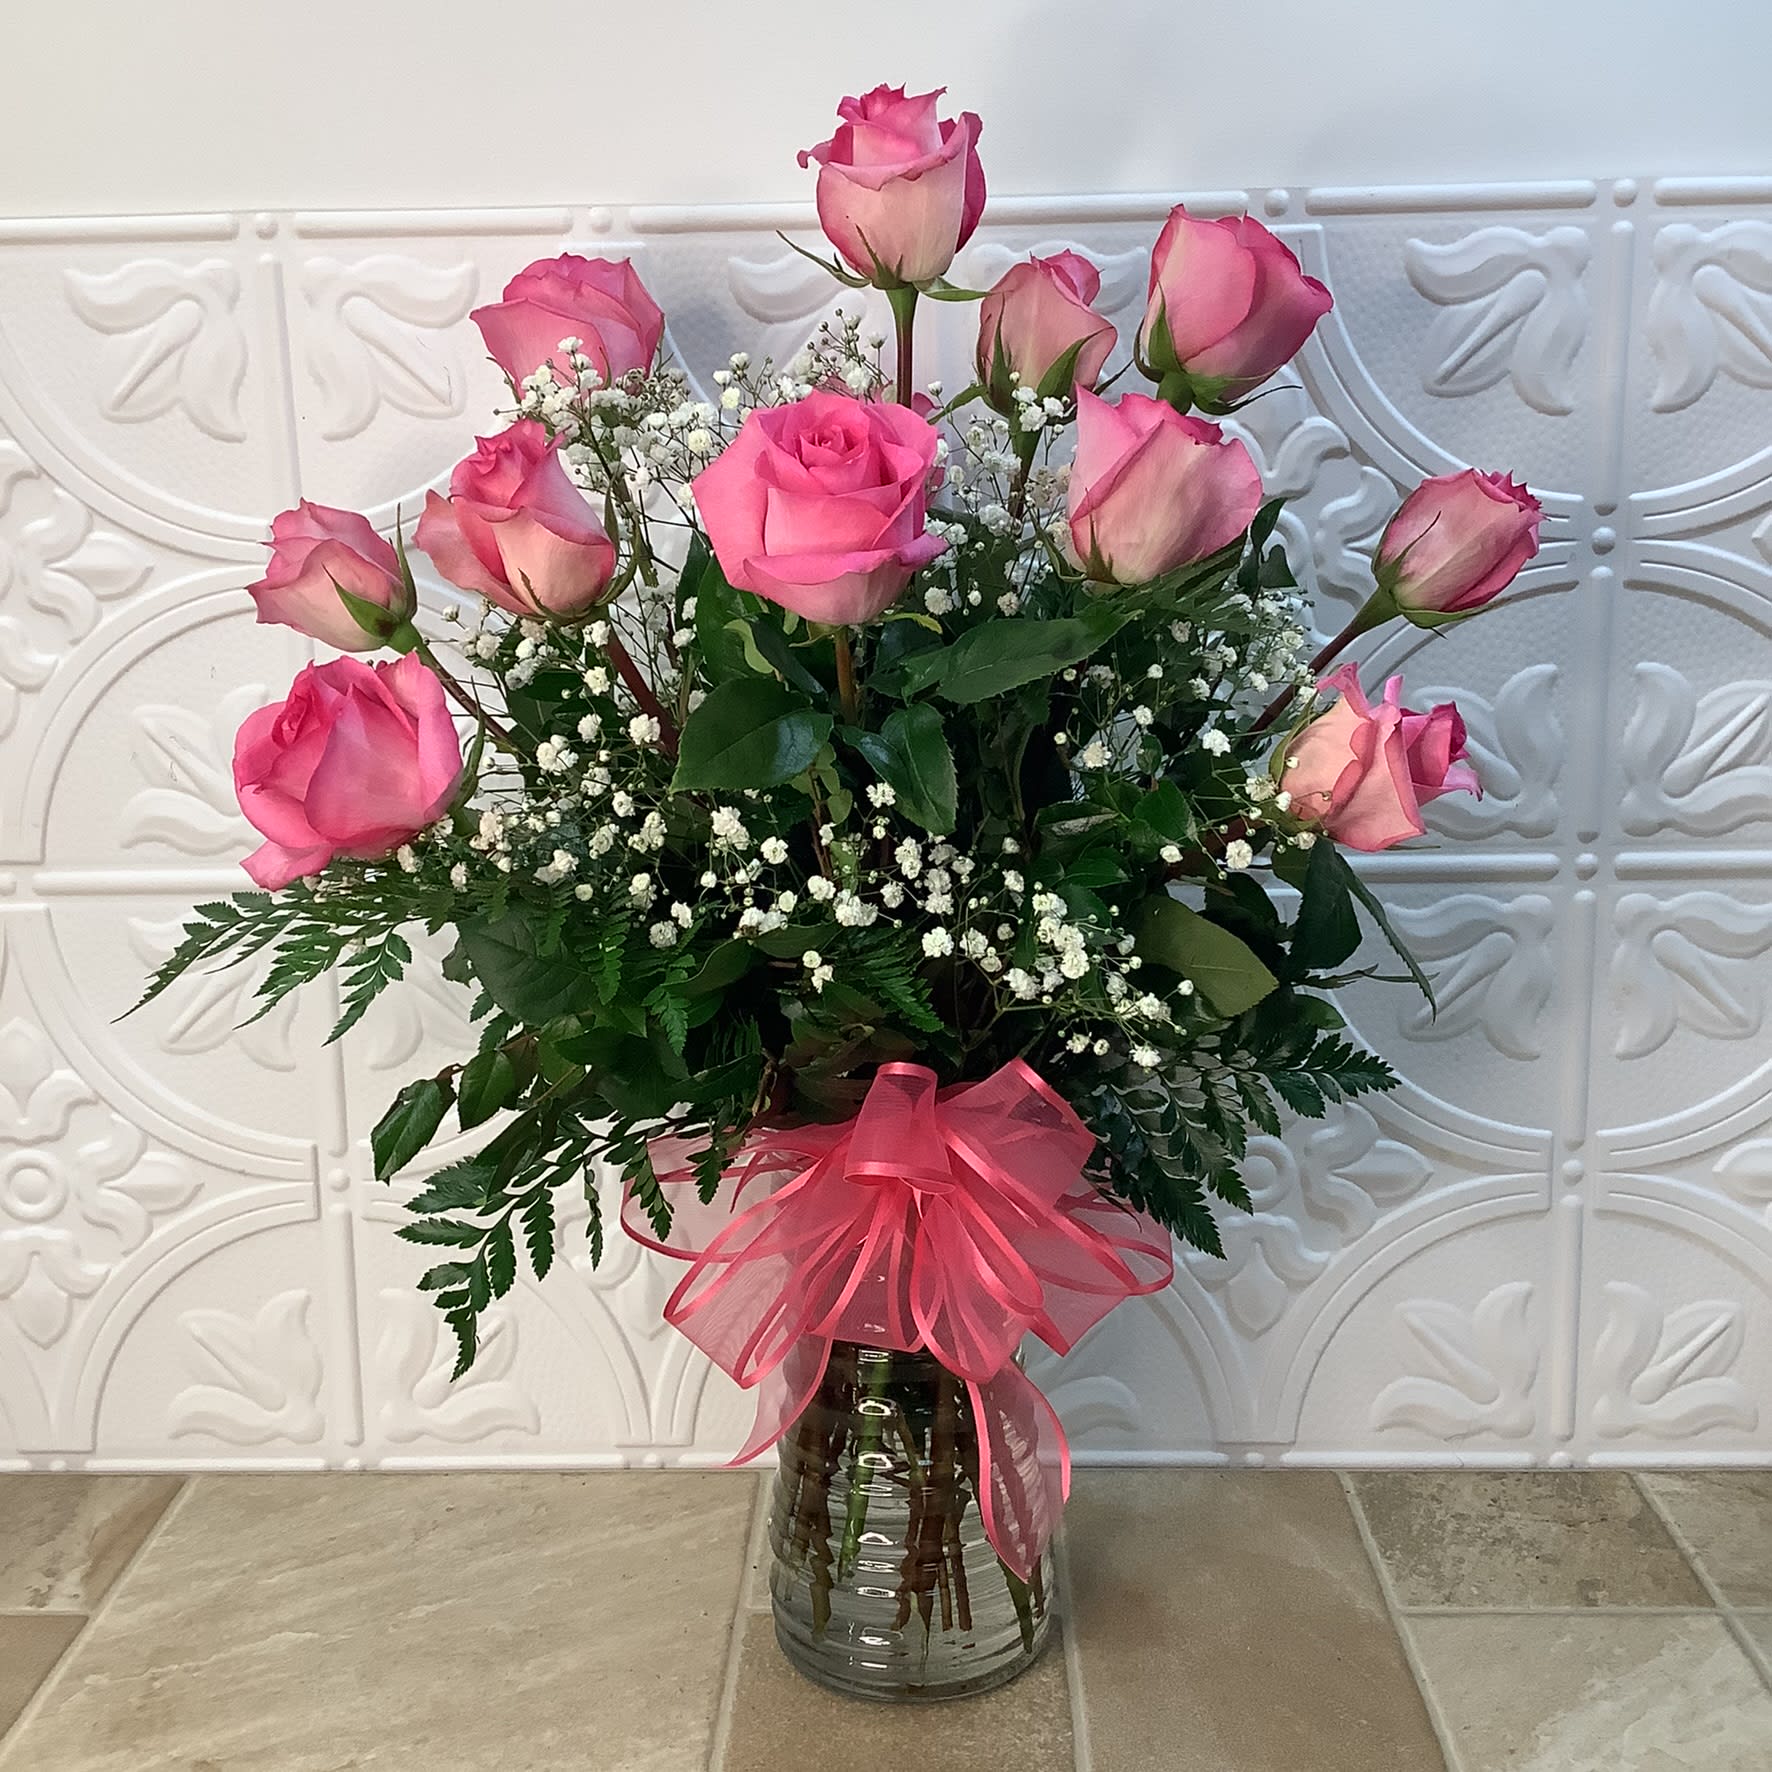 Mother’s Day Dozen - Celebrate the wonderful Moms in your life with this stunning bouquet of 12 long stemmed pink roses and baby’s breath. A beautiful way to show your love this Mother’s Day. 